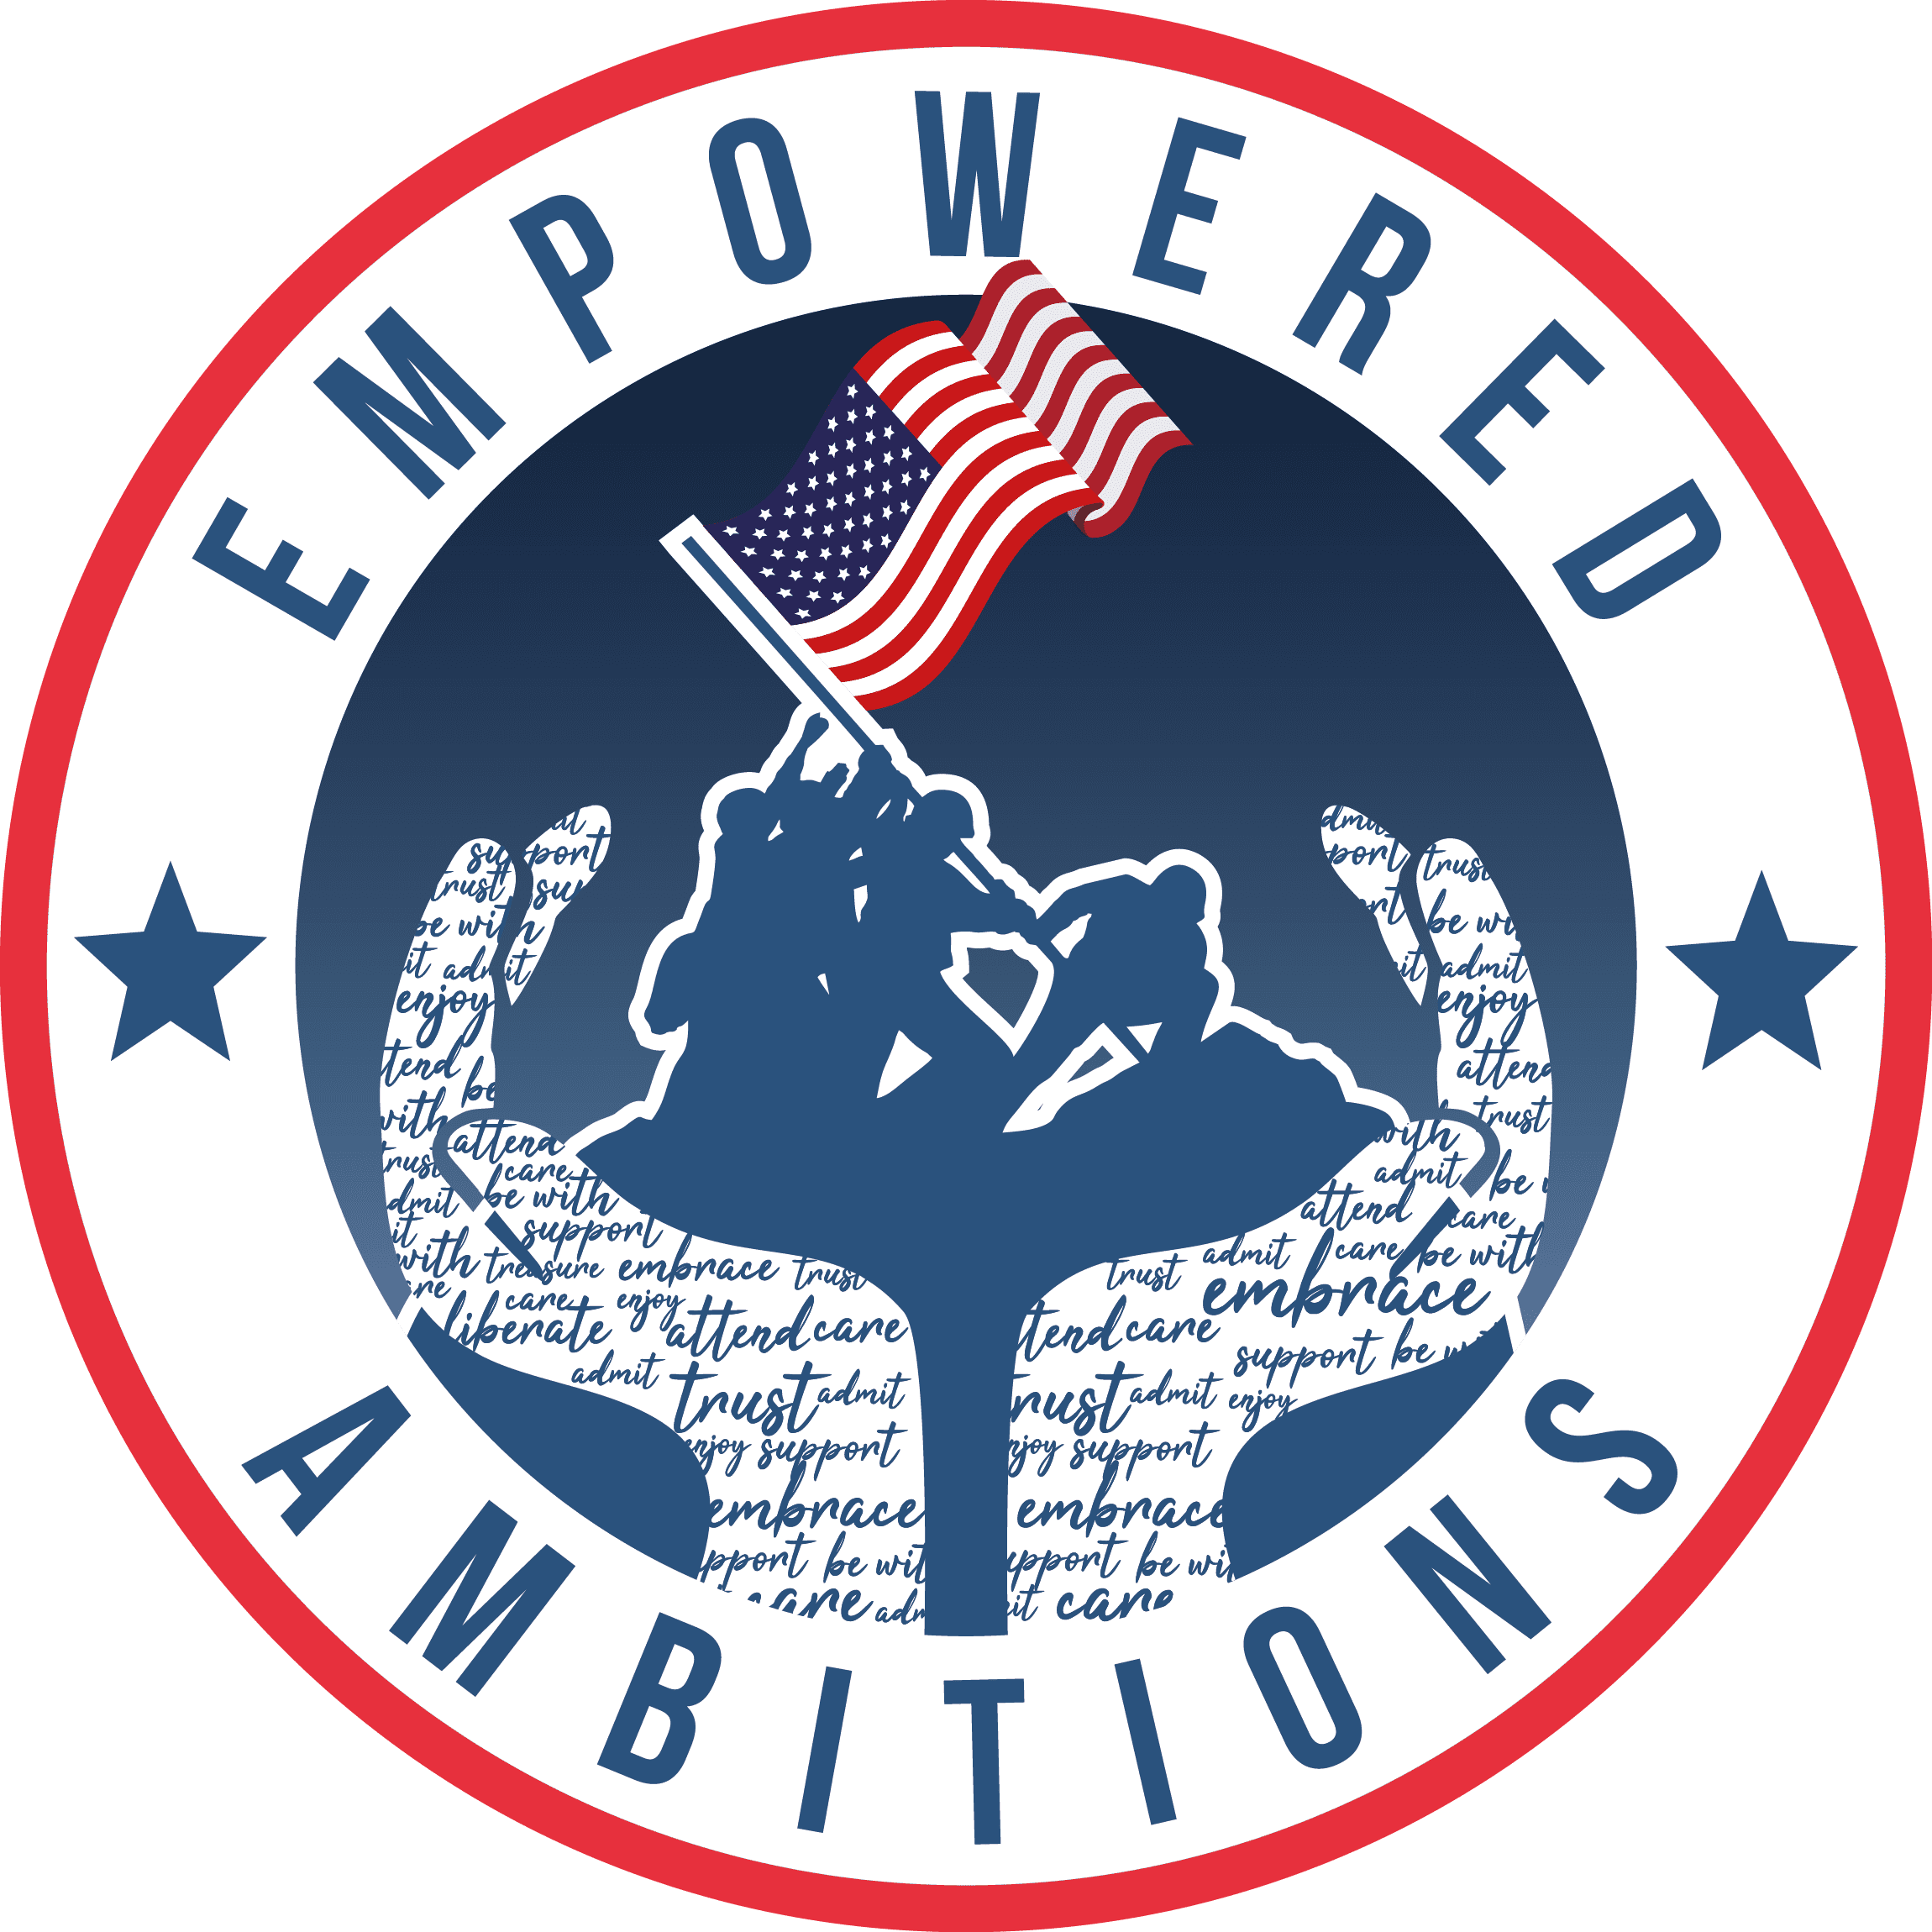 Empowered Ambitions